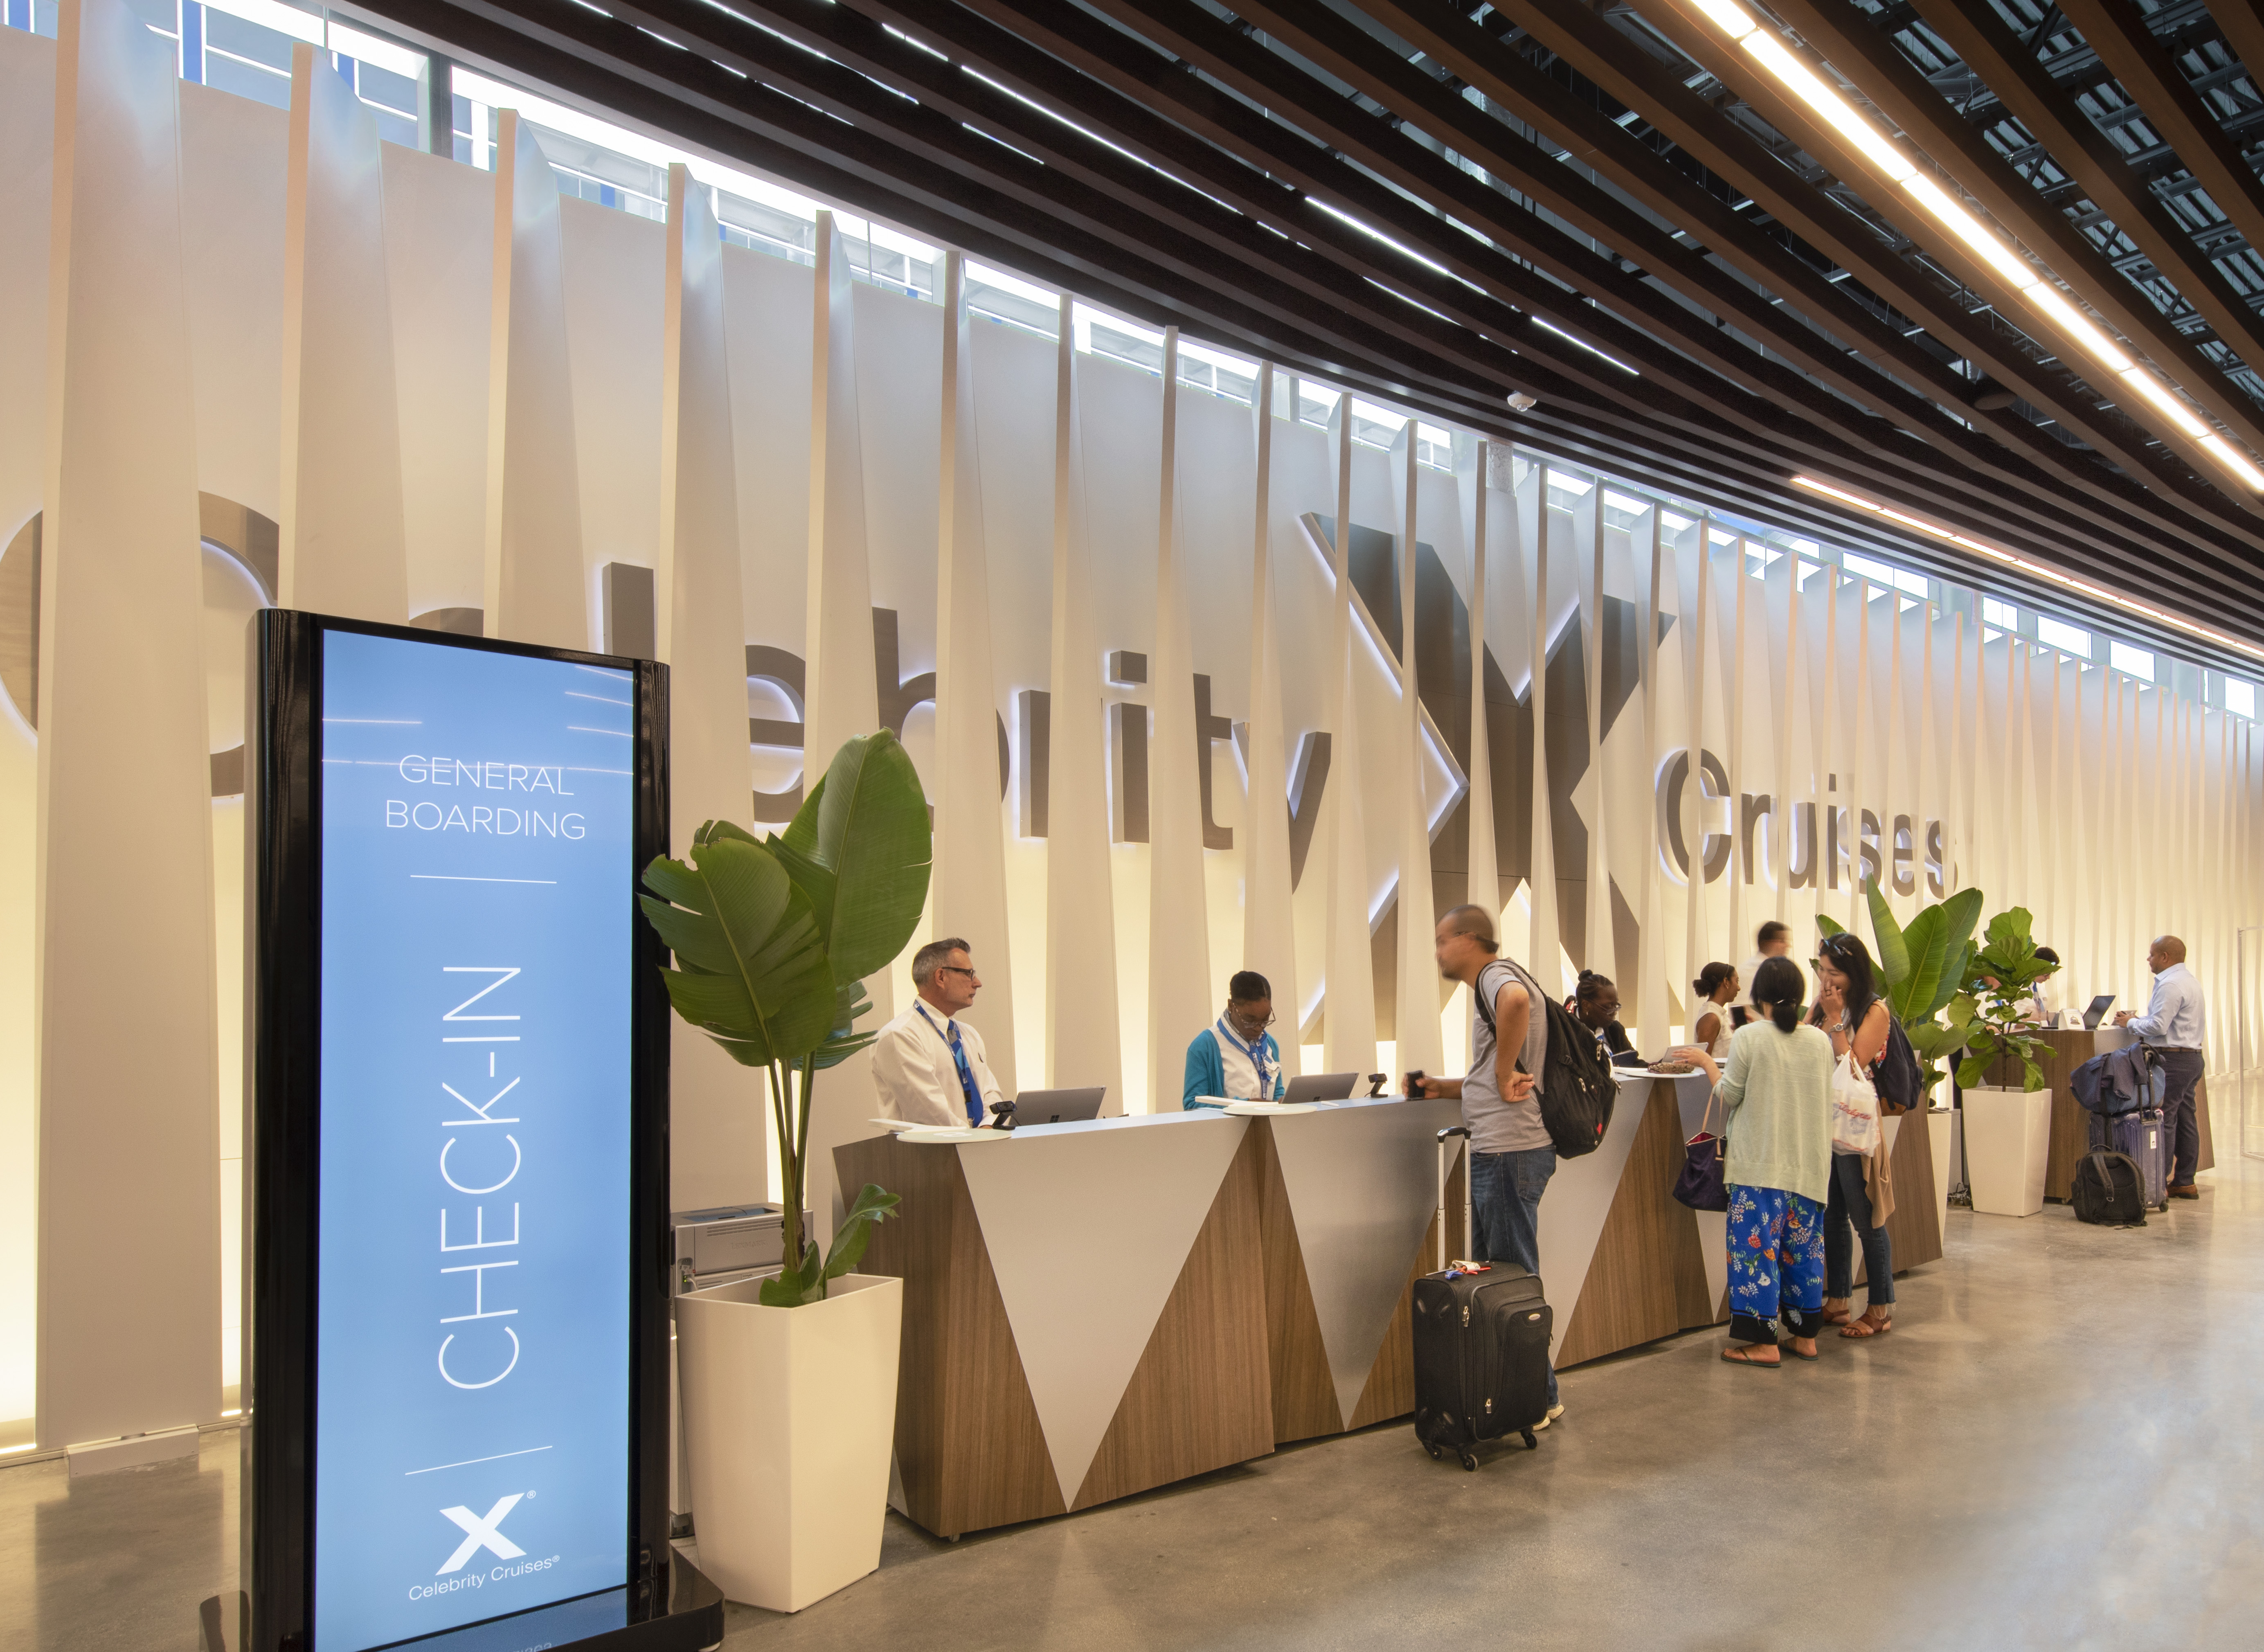 Celebrity Cruises’ Terminal 25, located at Port Everglades in Hollywood, FL, contains 48 mobile kiosks – provided by Peerless-AV and LG – that provide key information to the millions of passengers who move through the terminal nearly every year.